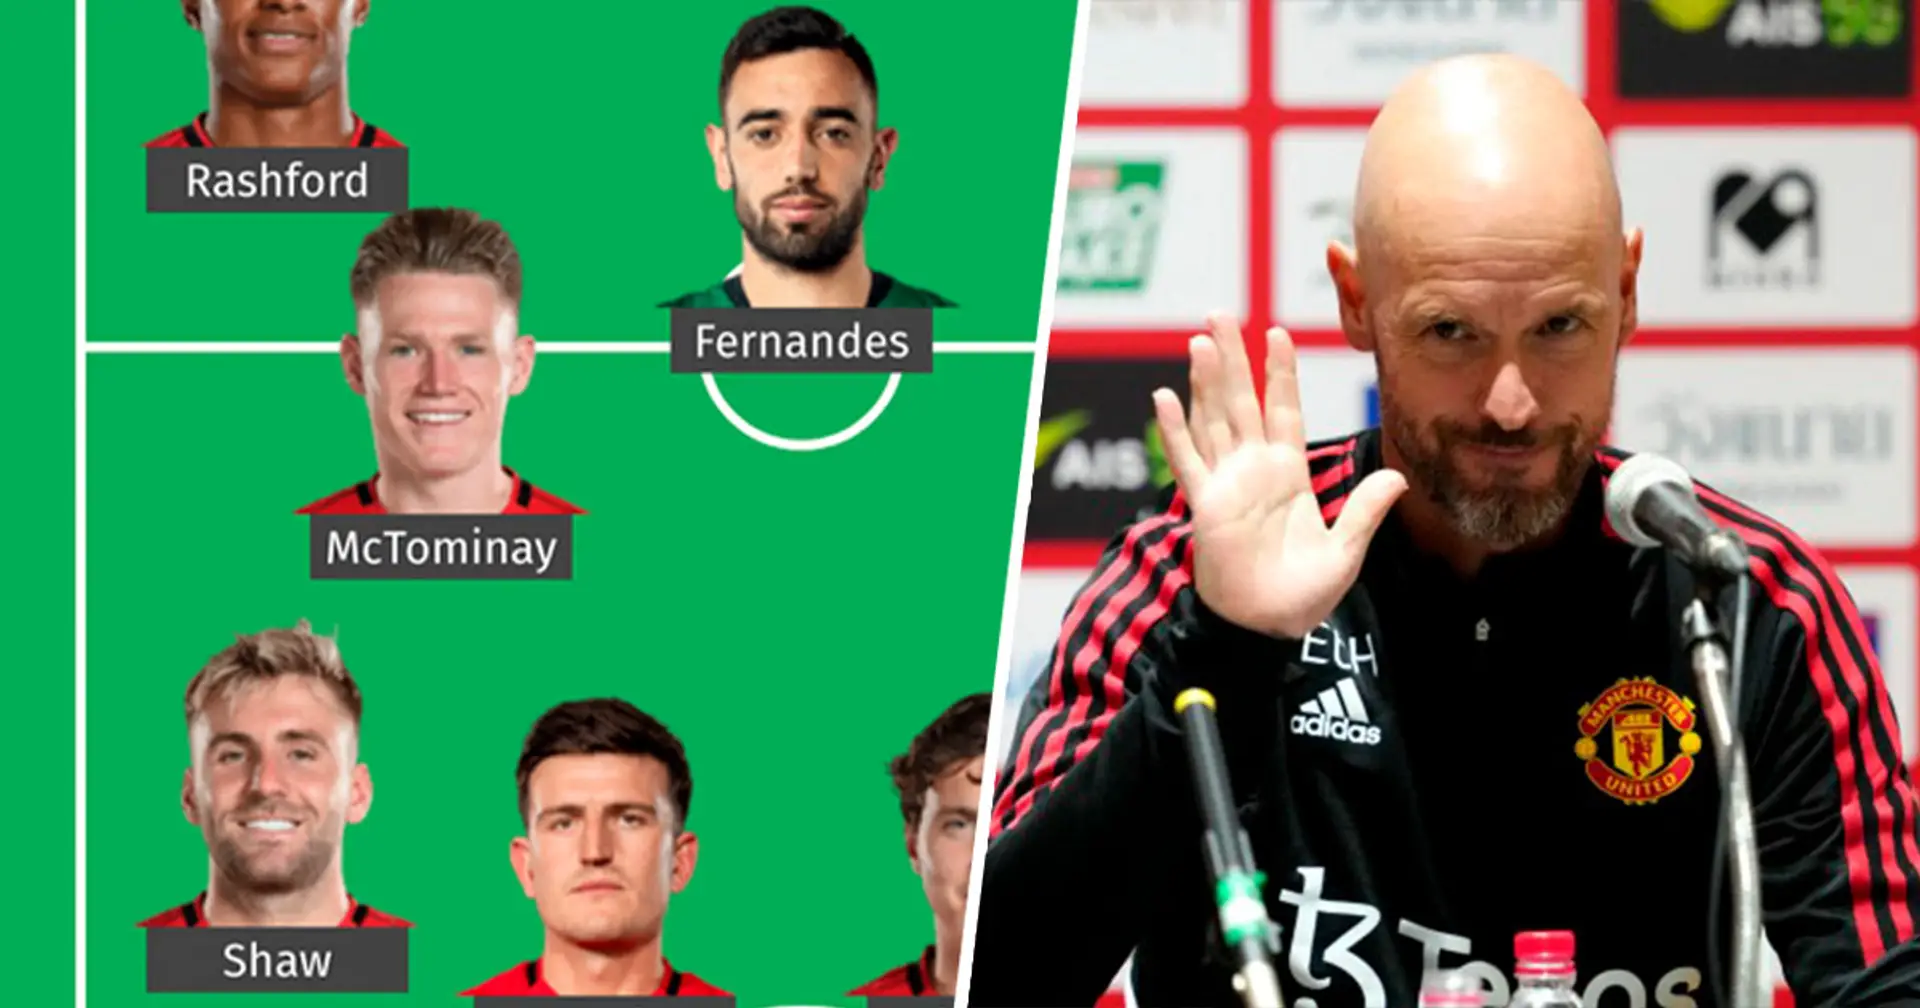 Erik ten Hag names 2 areas Man United are working on strengthening in the transfer market